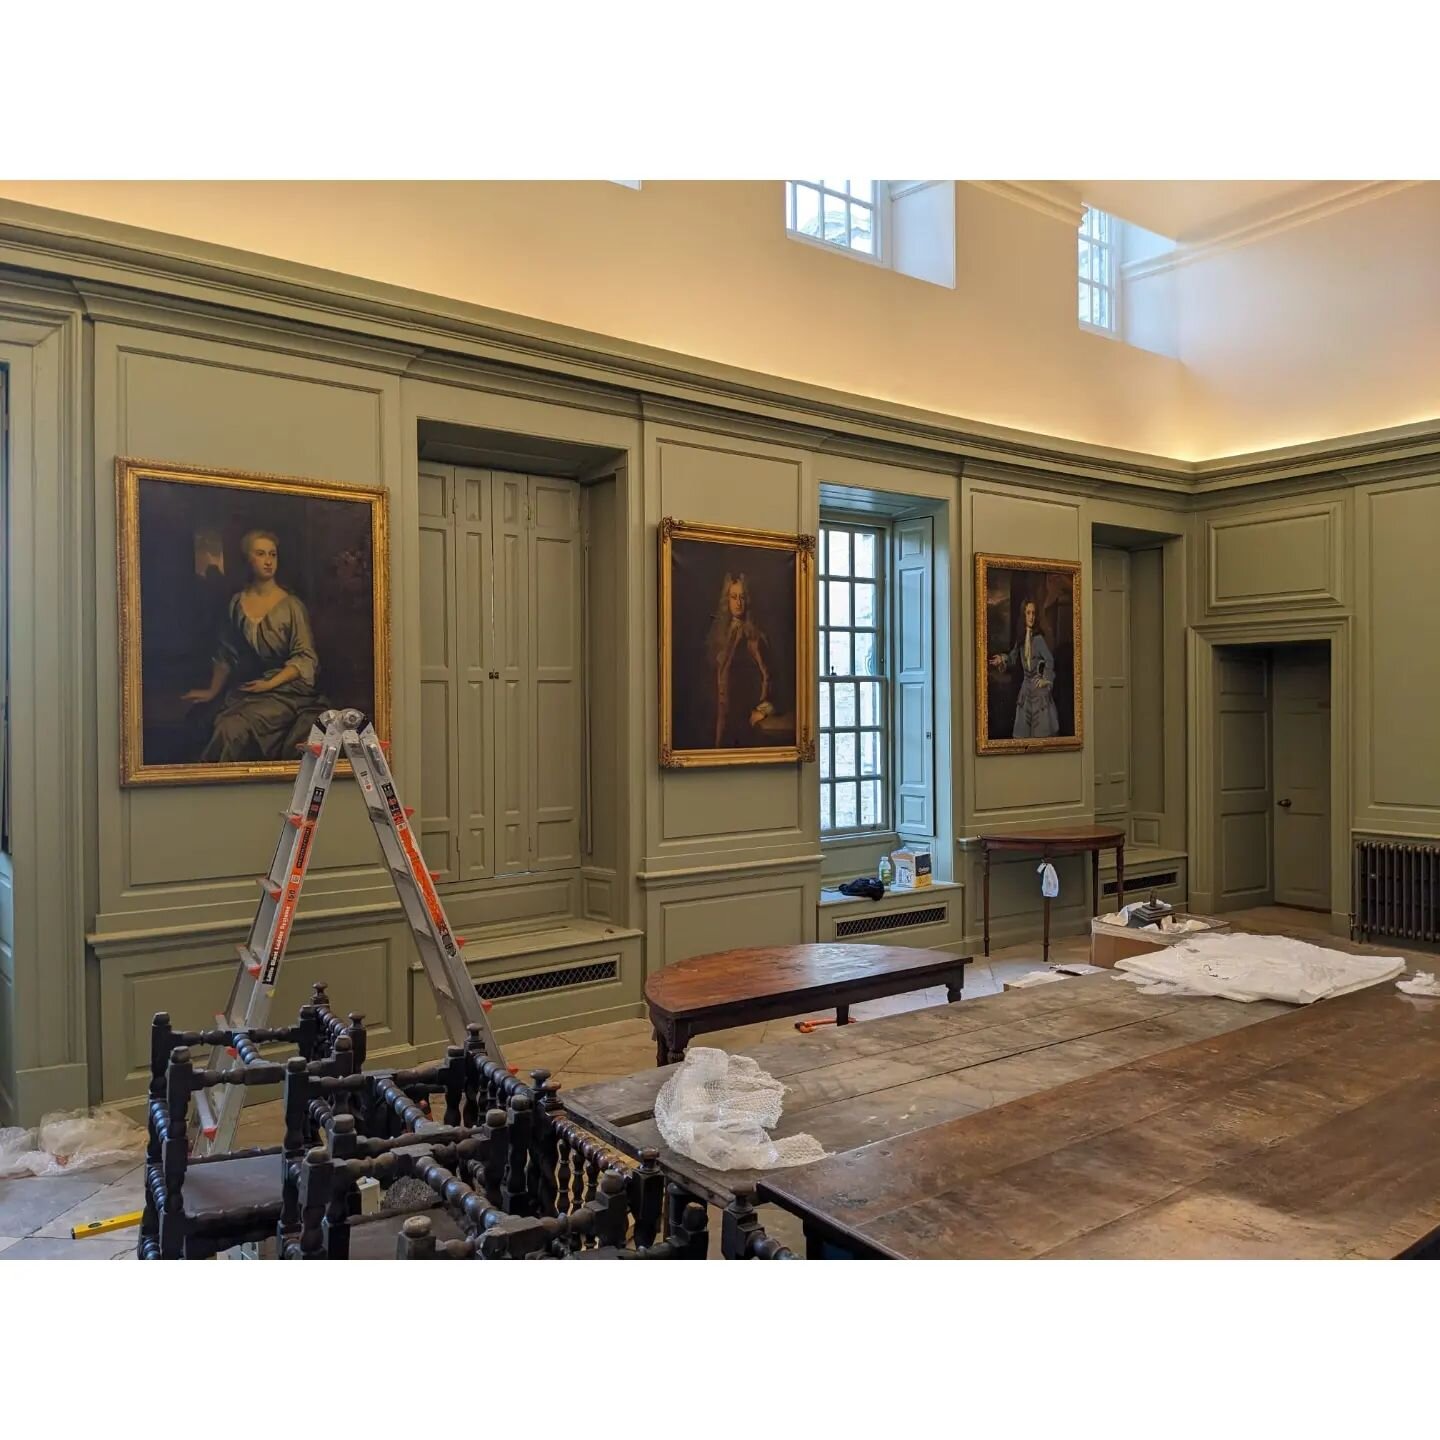 A highlight from 2023:
Installation of a collection of oil portraits in stately home renovation, with one of the largest being over 3m tall.

#hangmyart #artinstallers #picturehangers #hangingart #artinstallation #artinstaller #picturehanger #gallery